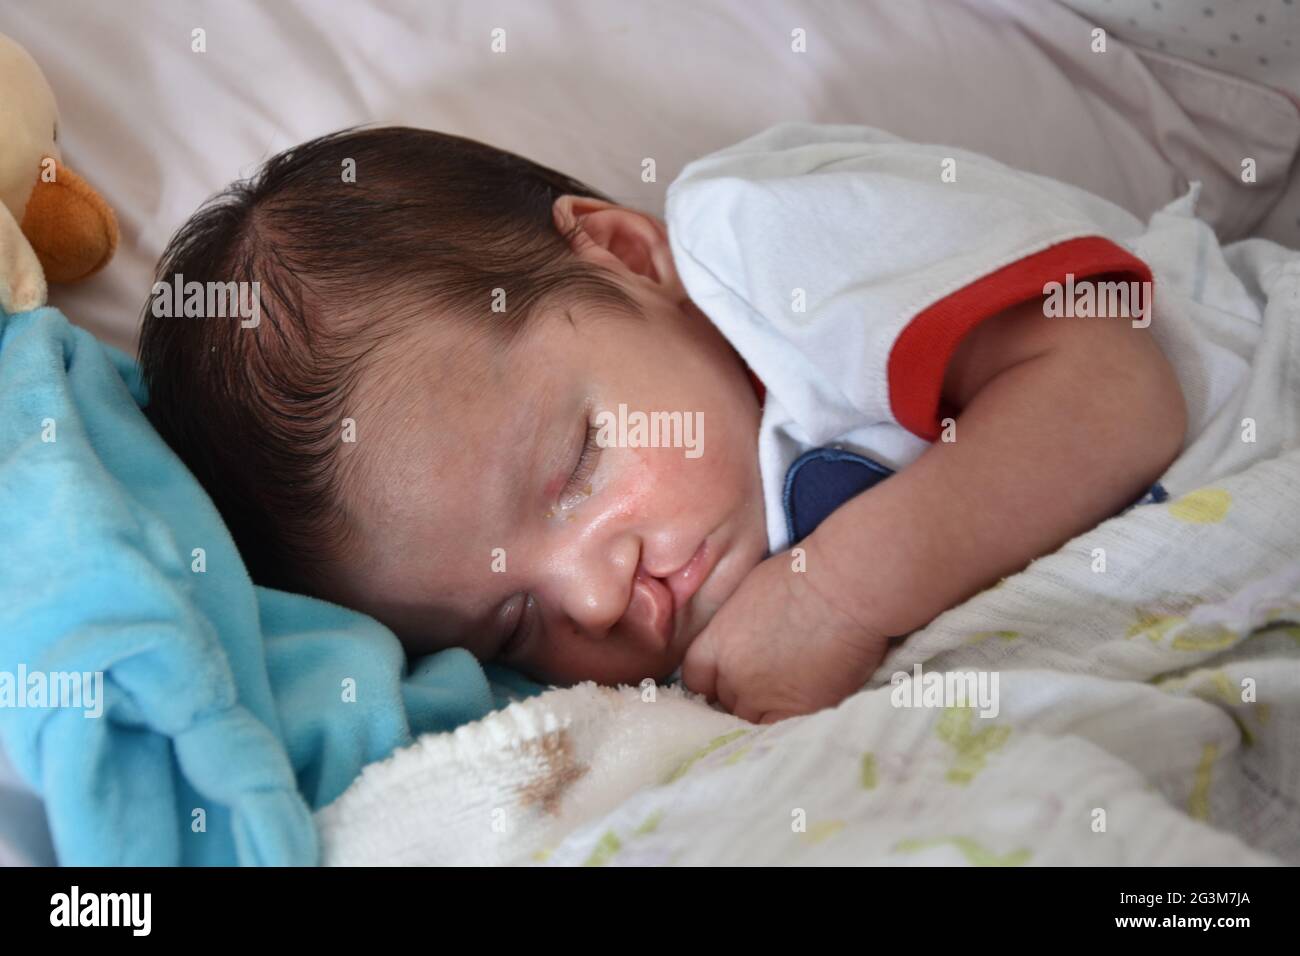 Baby with Cleft lip and cleft palate. Stock Photo